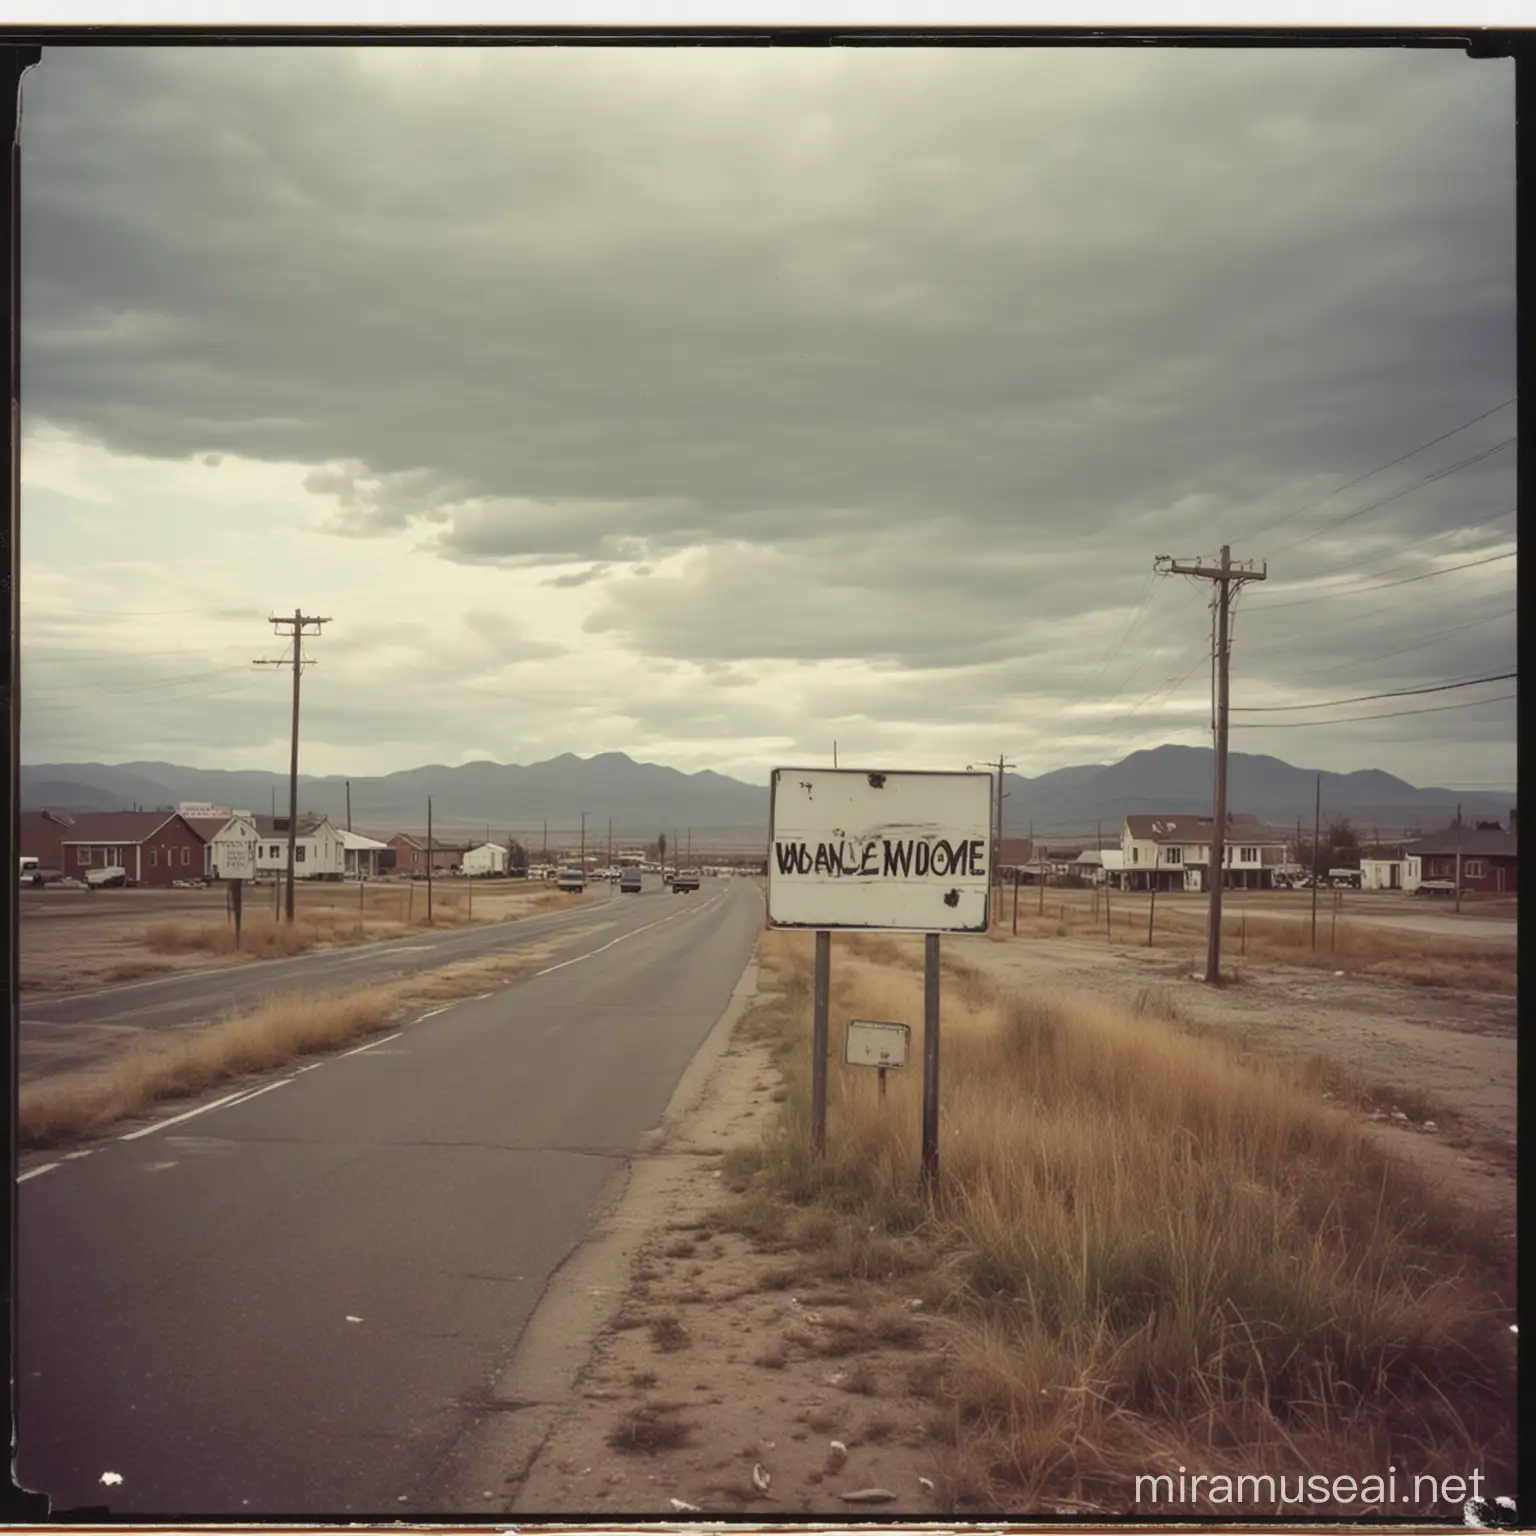 A blank welcome sign, small town in the background, 1993, polaroid picture, apocalypse, 